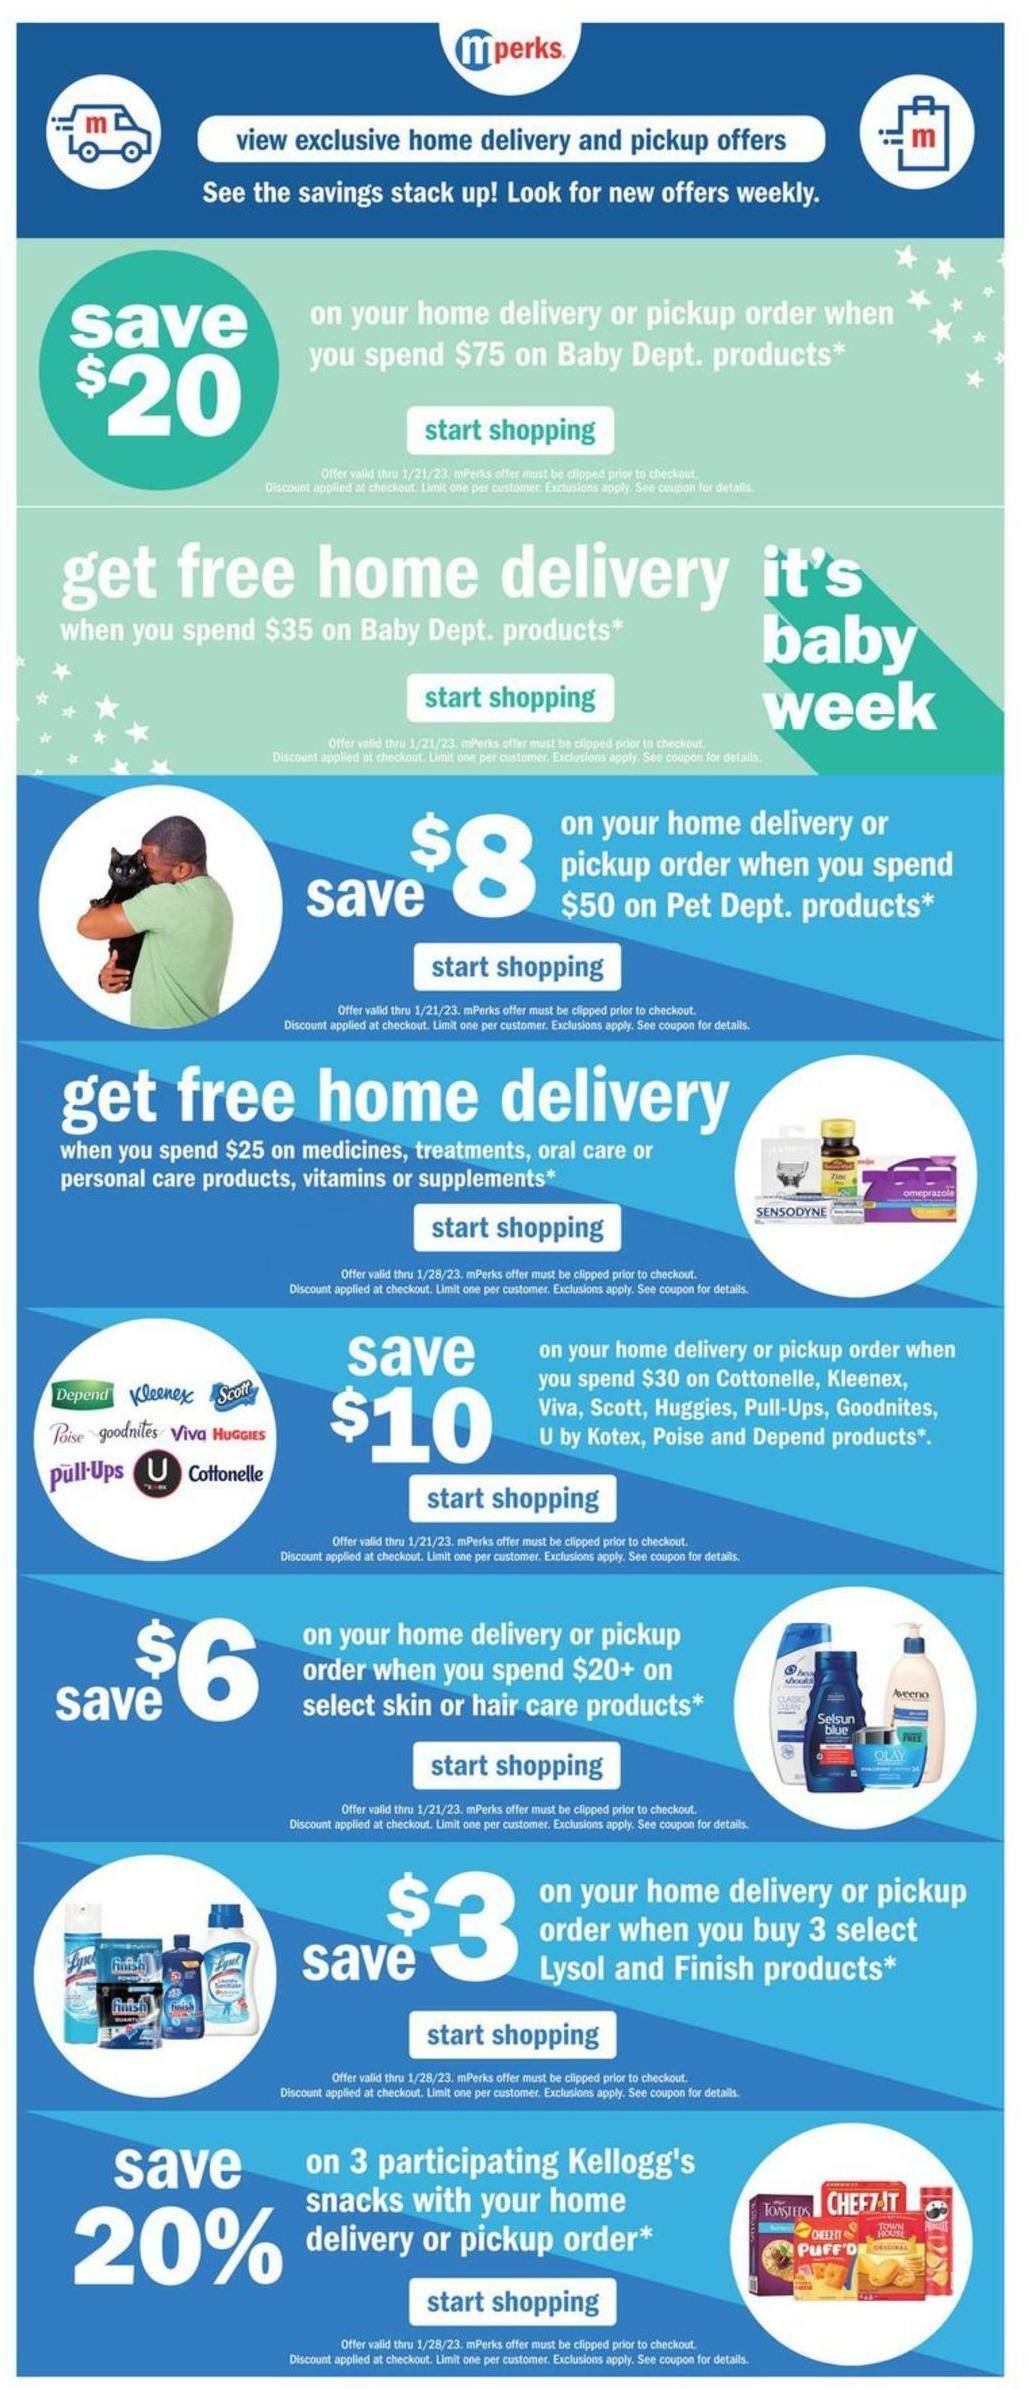 Meijer Weekly Ad from January 15